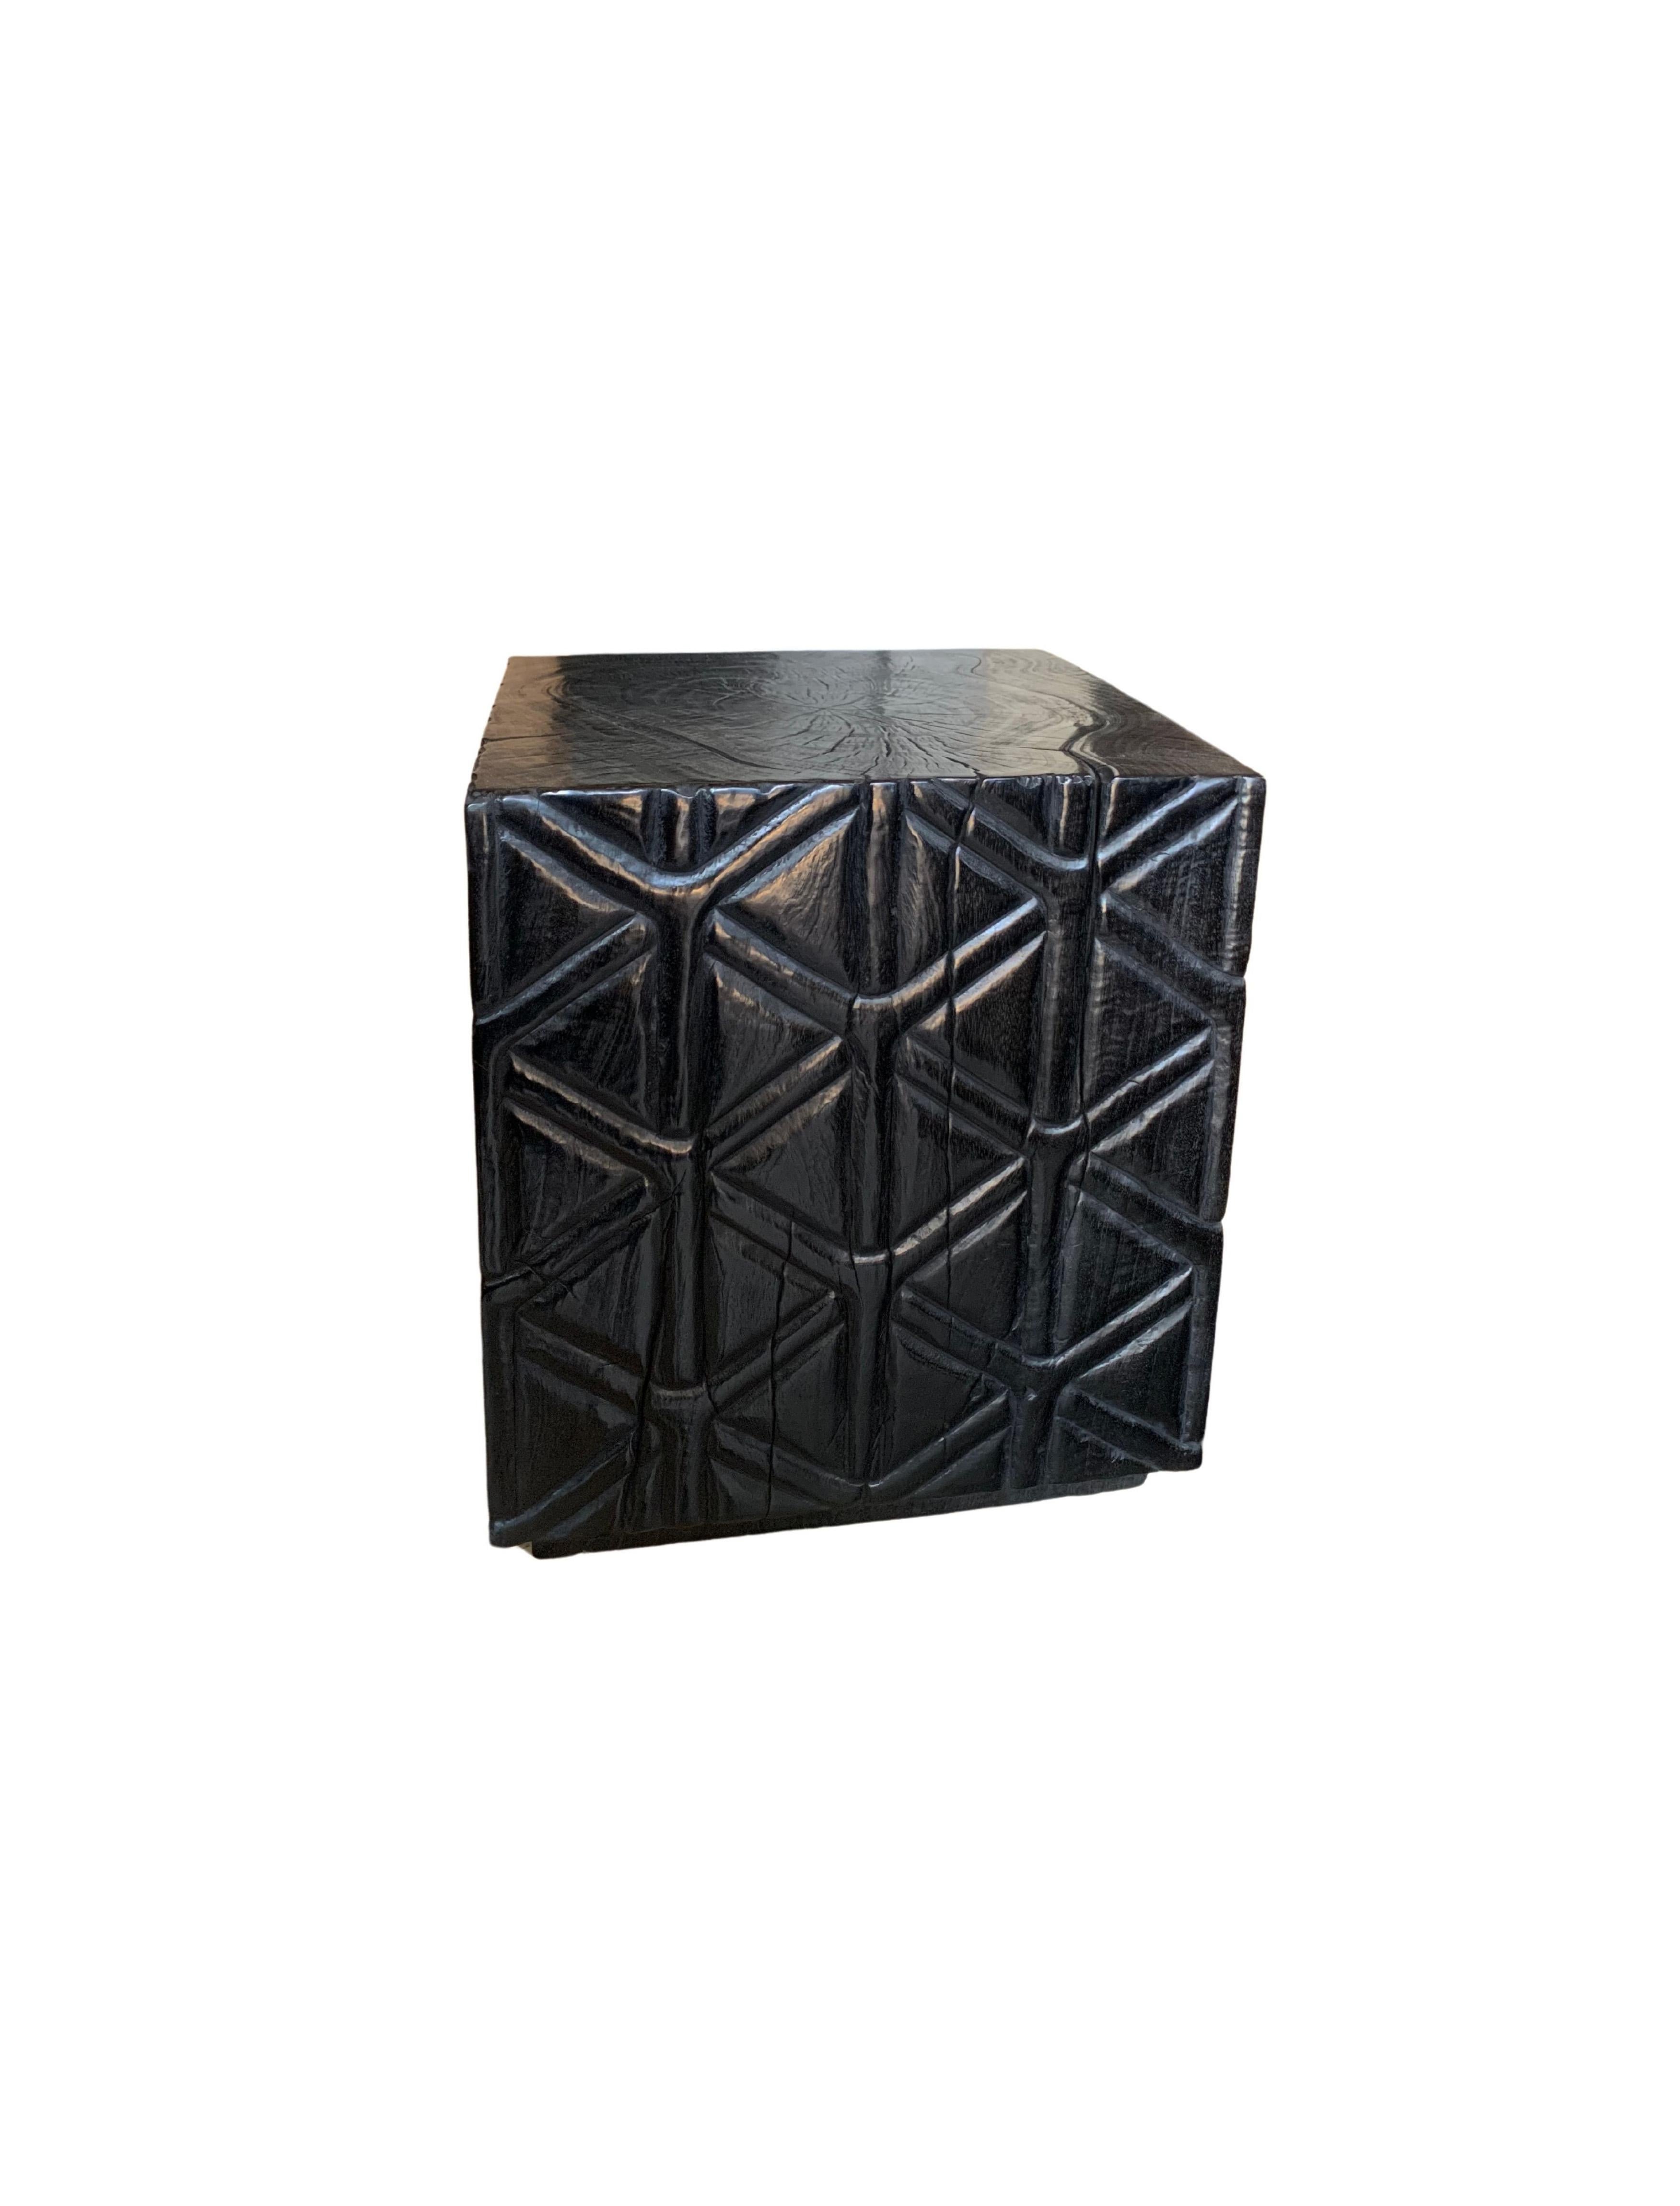 Indonesian Sculptural Side Table Crafted from Mango Wood For Sale